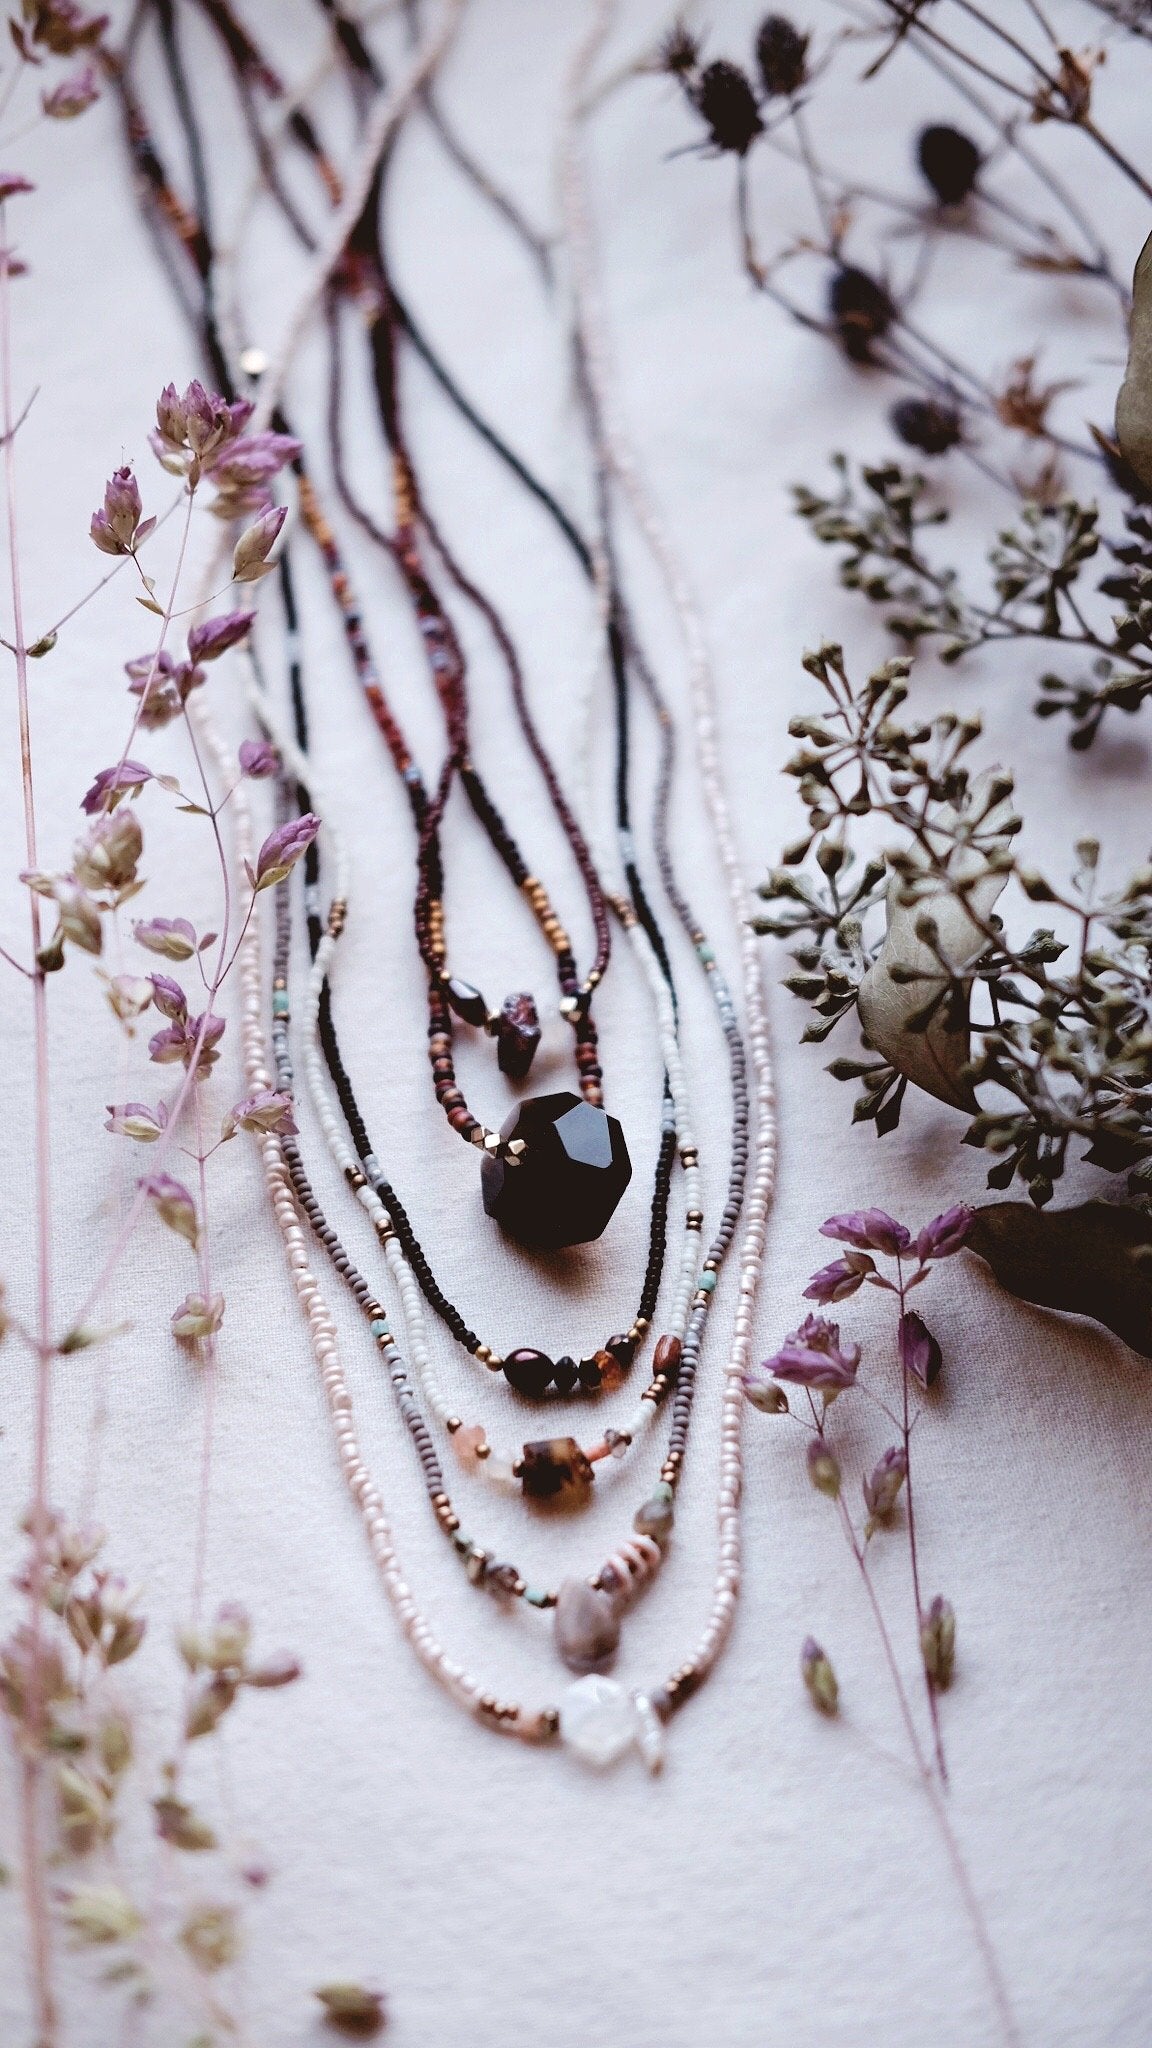 The Poetess + Moonstone + Peach Spinel + Pyrite + Pearl fragment necklace